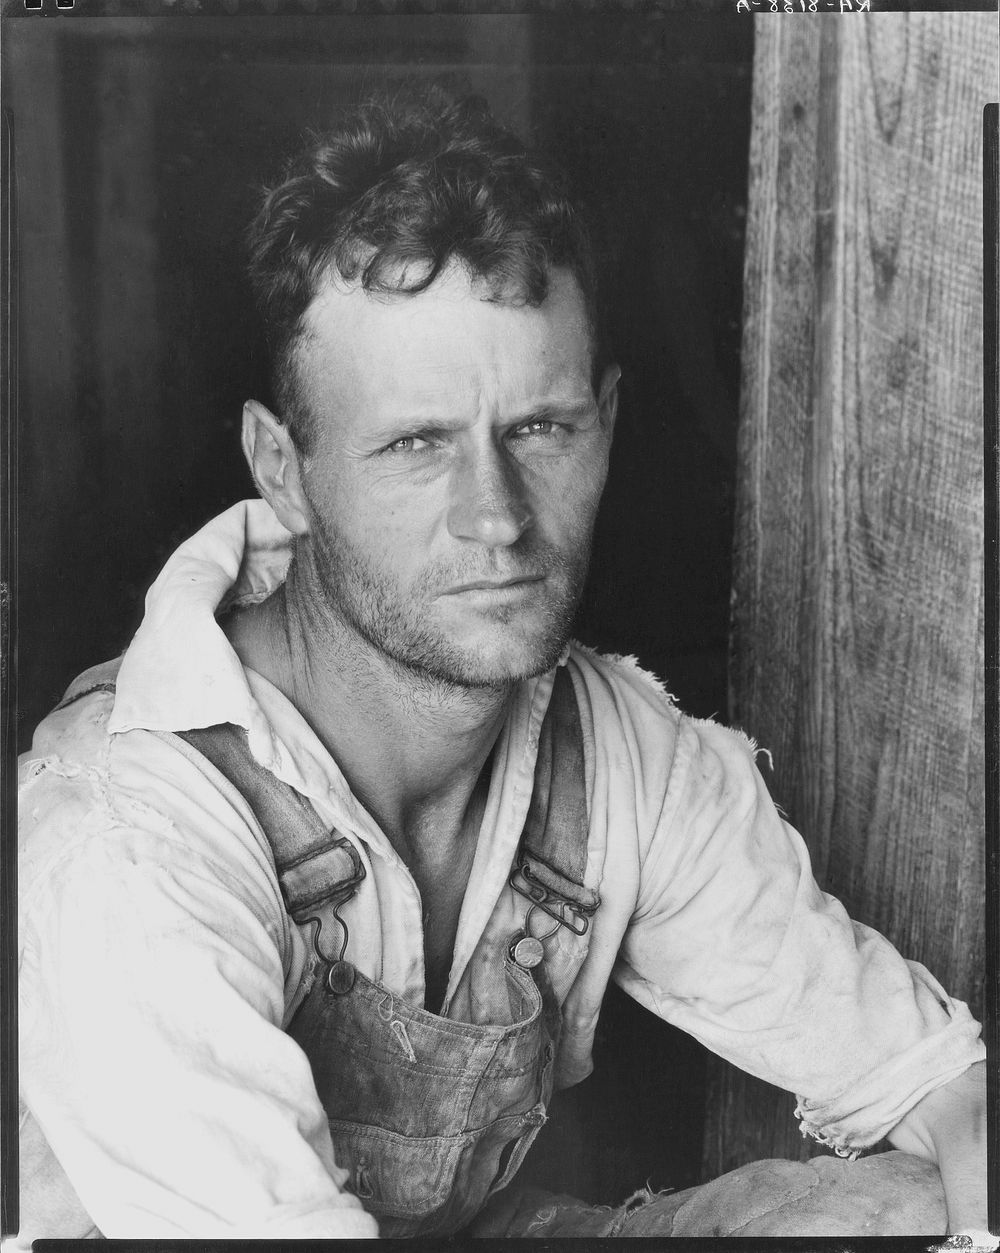 Floyd Burroughs, cotton sharecropper. Hale County, Alabama. Sourced from the Library of Congress.